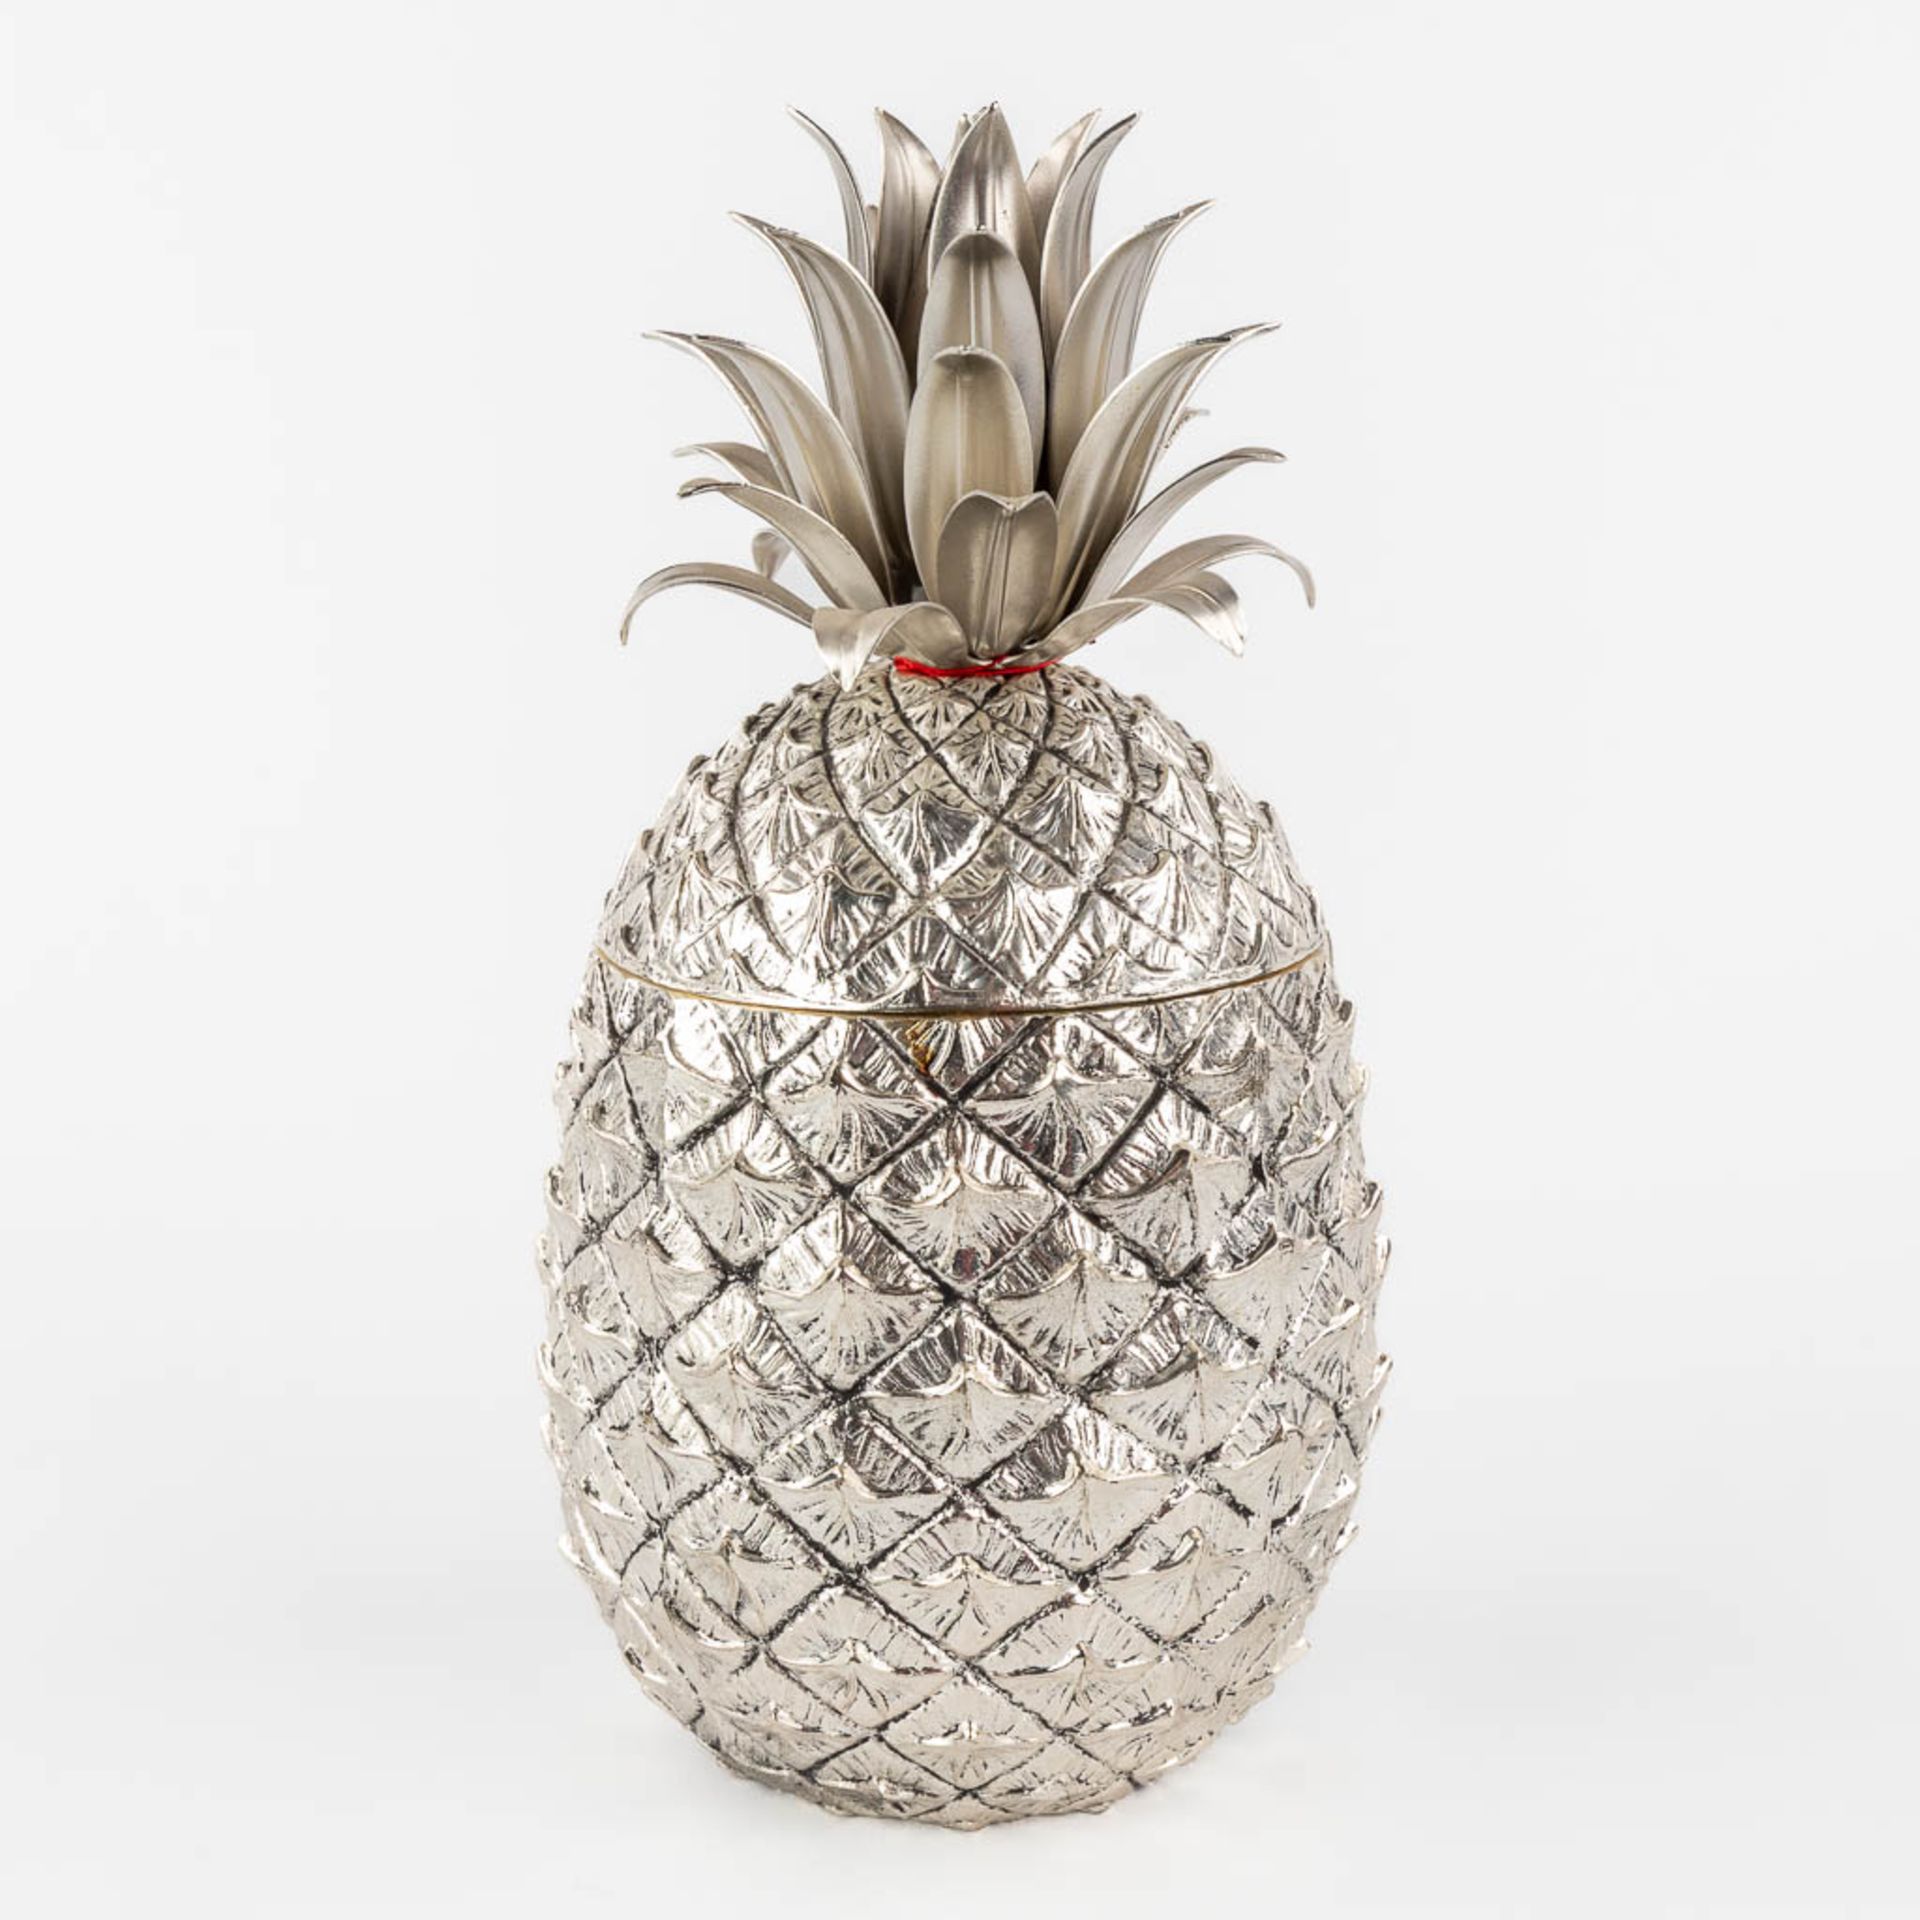 Mauro MANETTI (XX) 'Pineapple' an ice pail. Italy, 20th C. (H:26 x D:14 cm) - Image 4 of 10